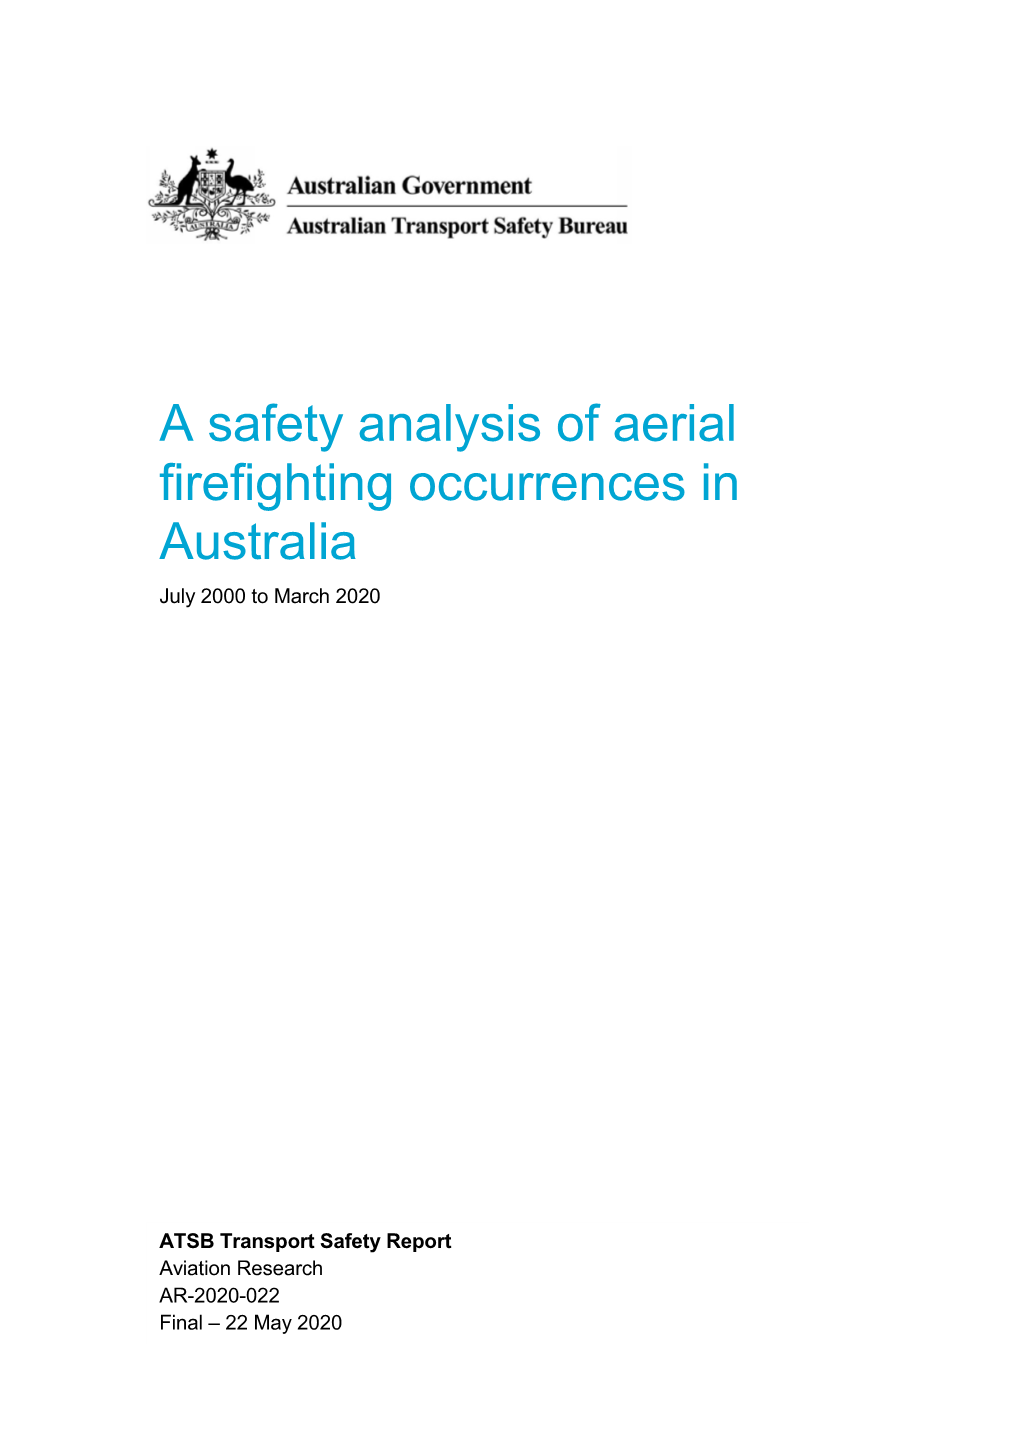 A Safety Analysis of Aerial Firefighting Occurrences in Australia, July 2000